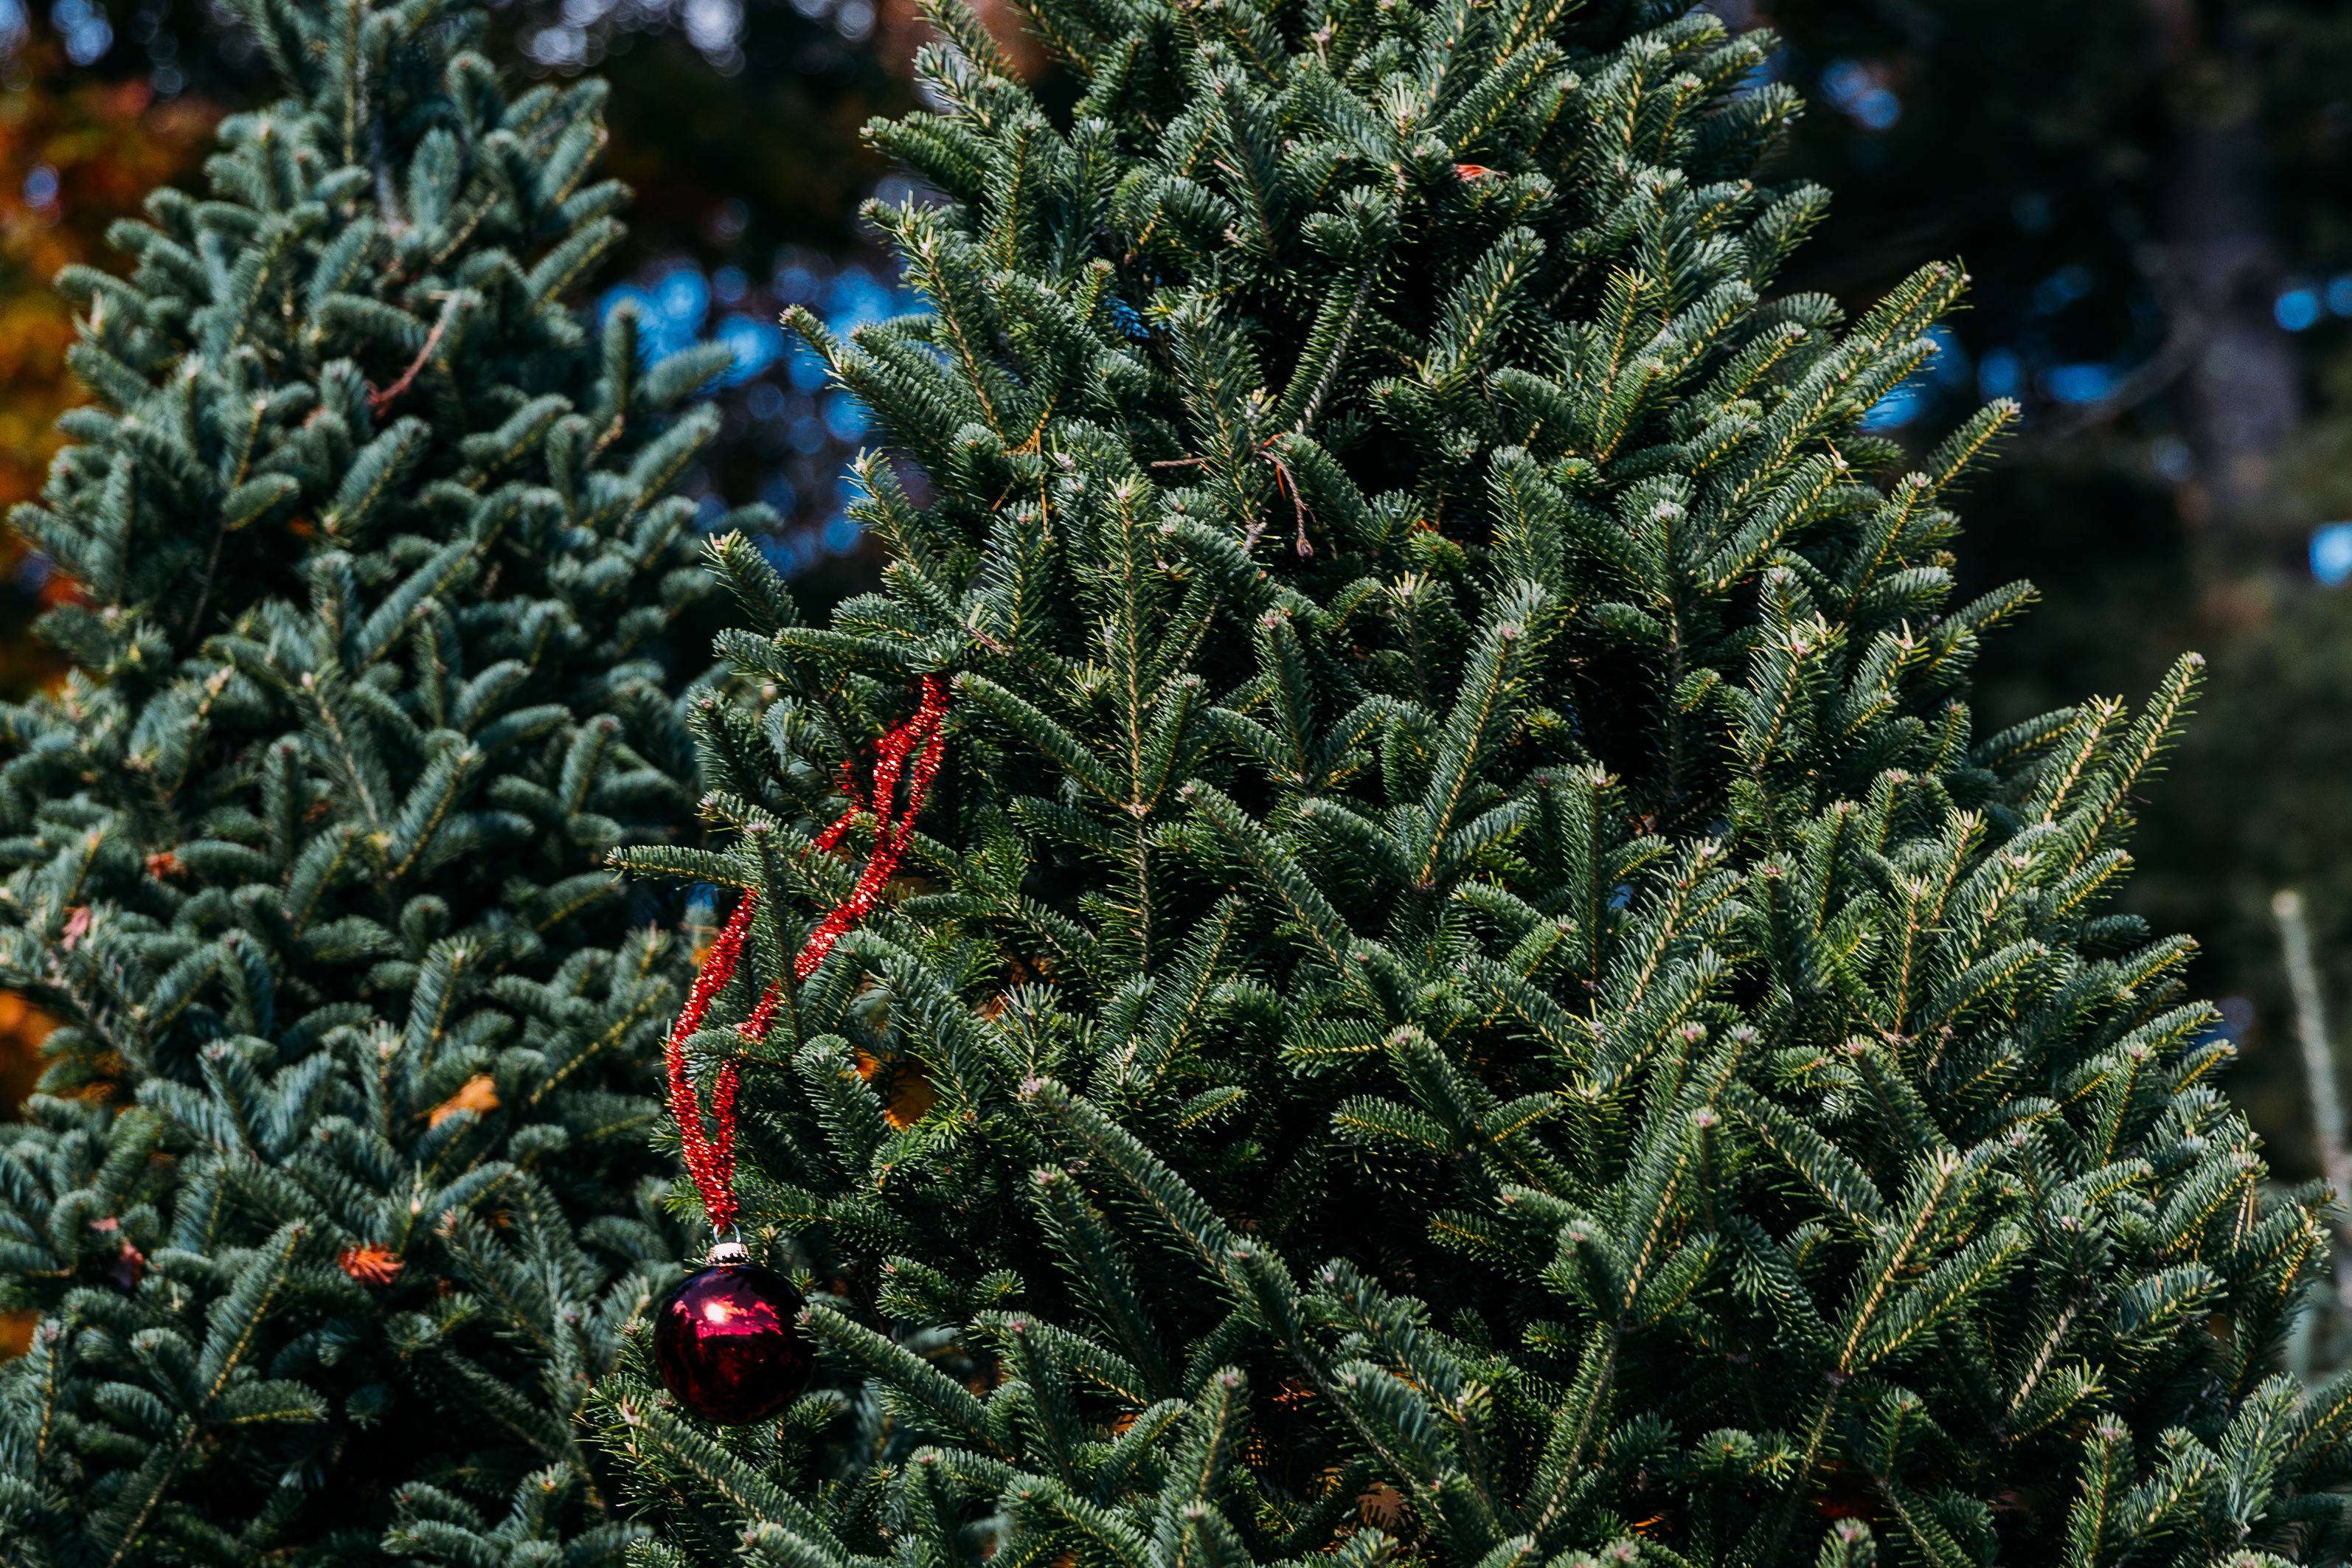 Red ornament on bare Christmas tree